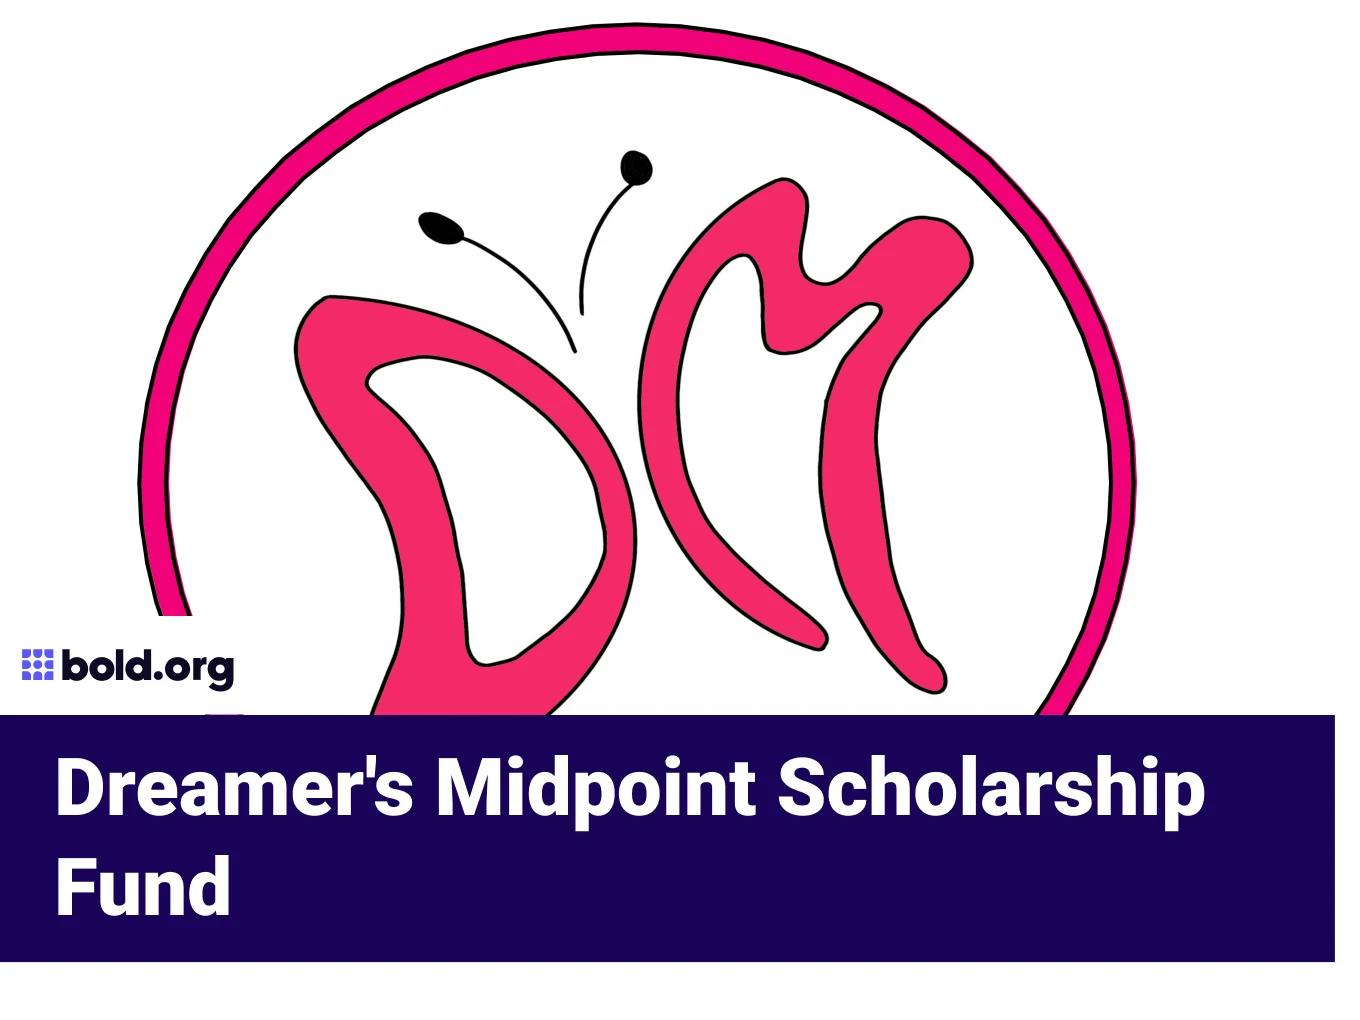 Dreamer's Midpoint Scholarship Fund